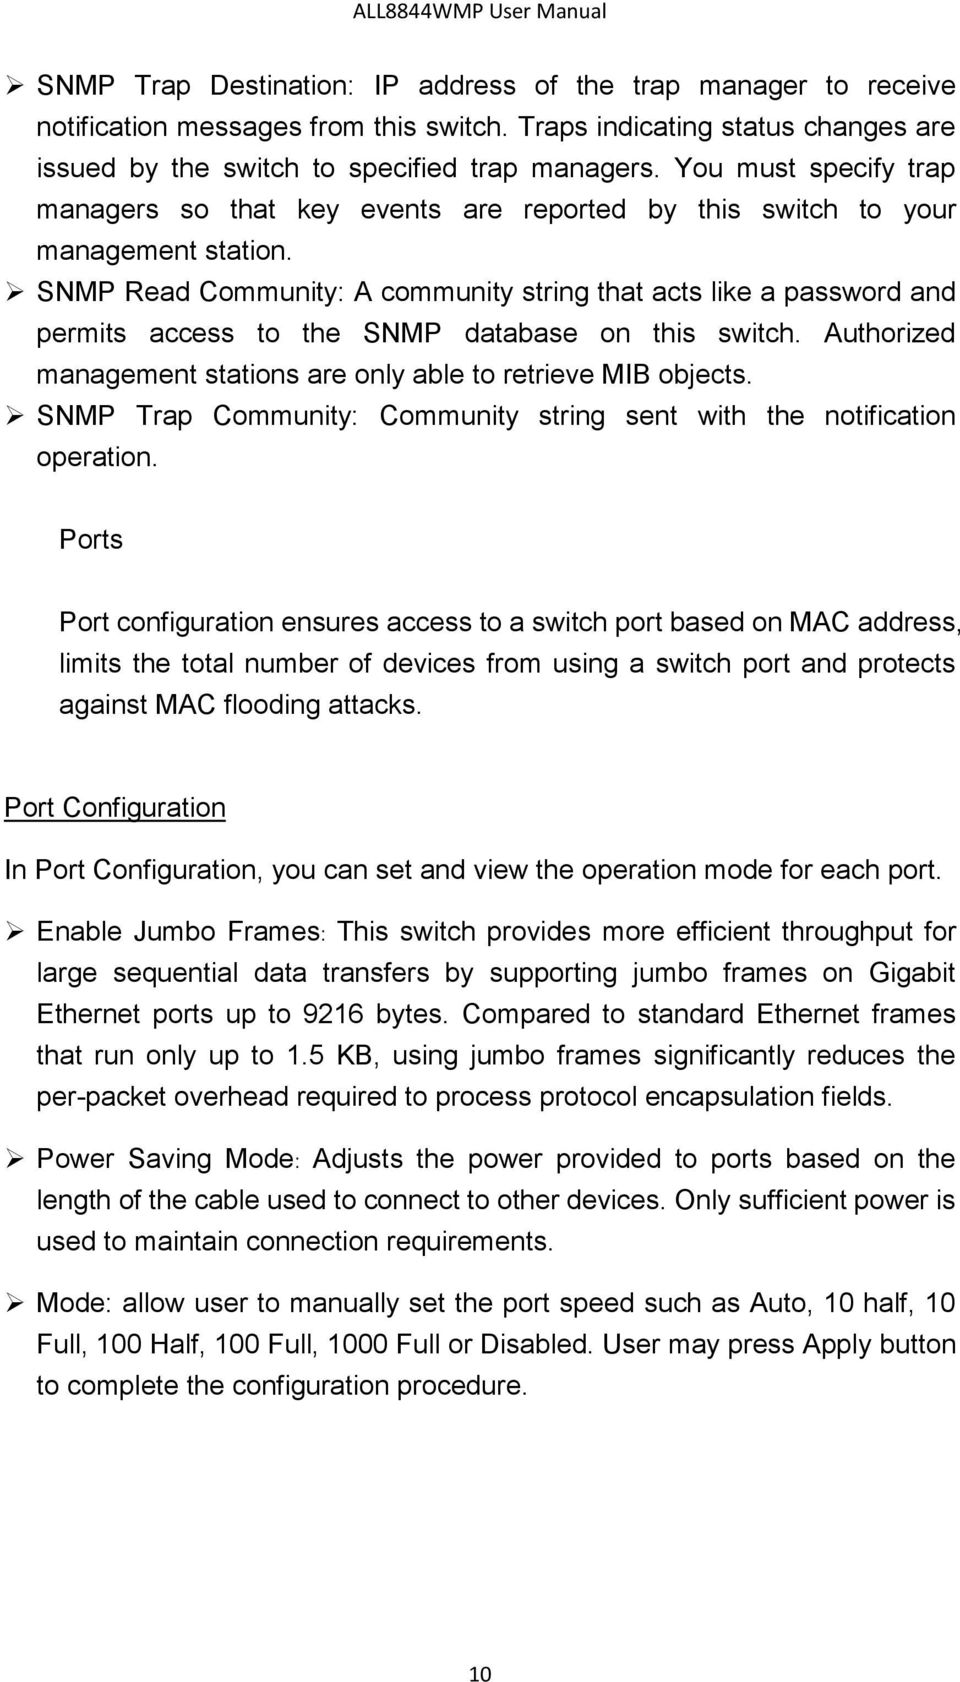 SNMP Read Community: A community string that acts like a password and permits access to the SNMP database on this switch. Authorized management stations are only able to retrieve MIB objects.